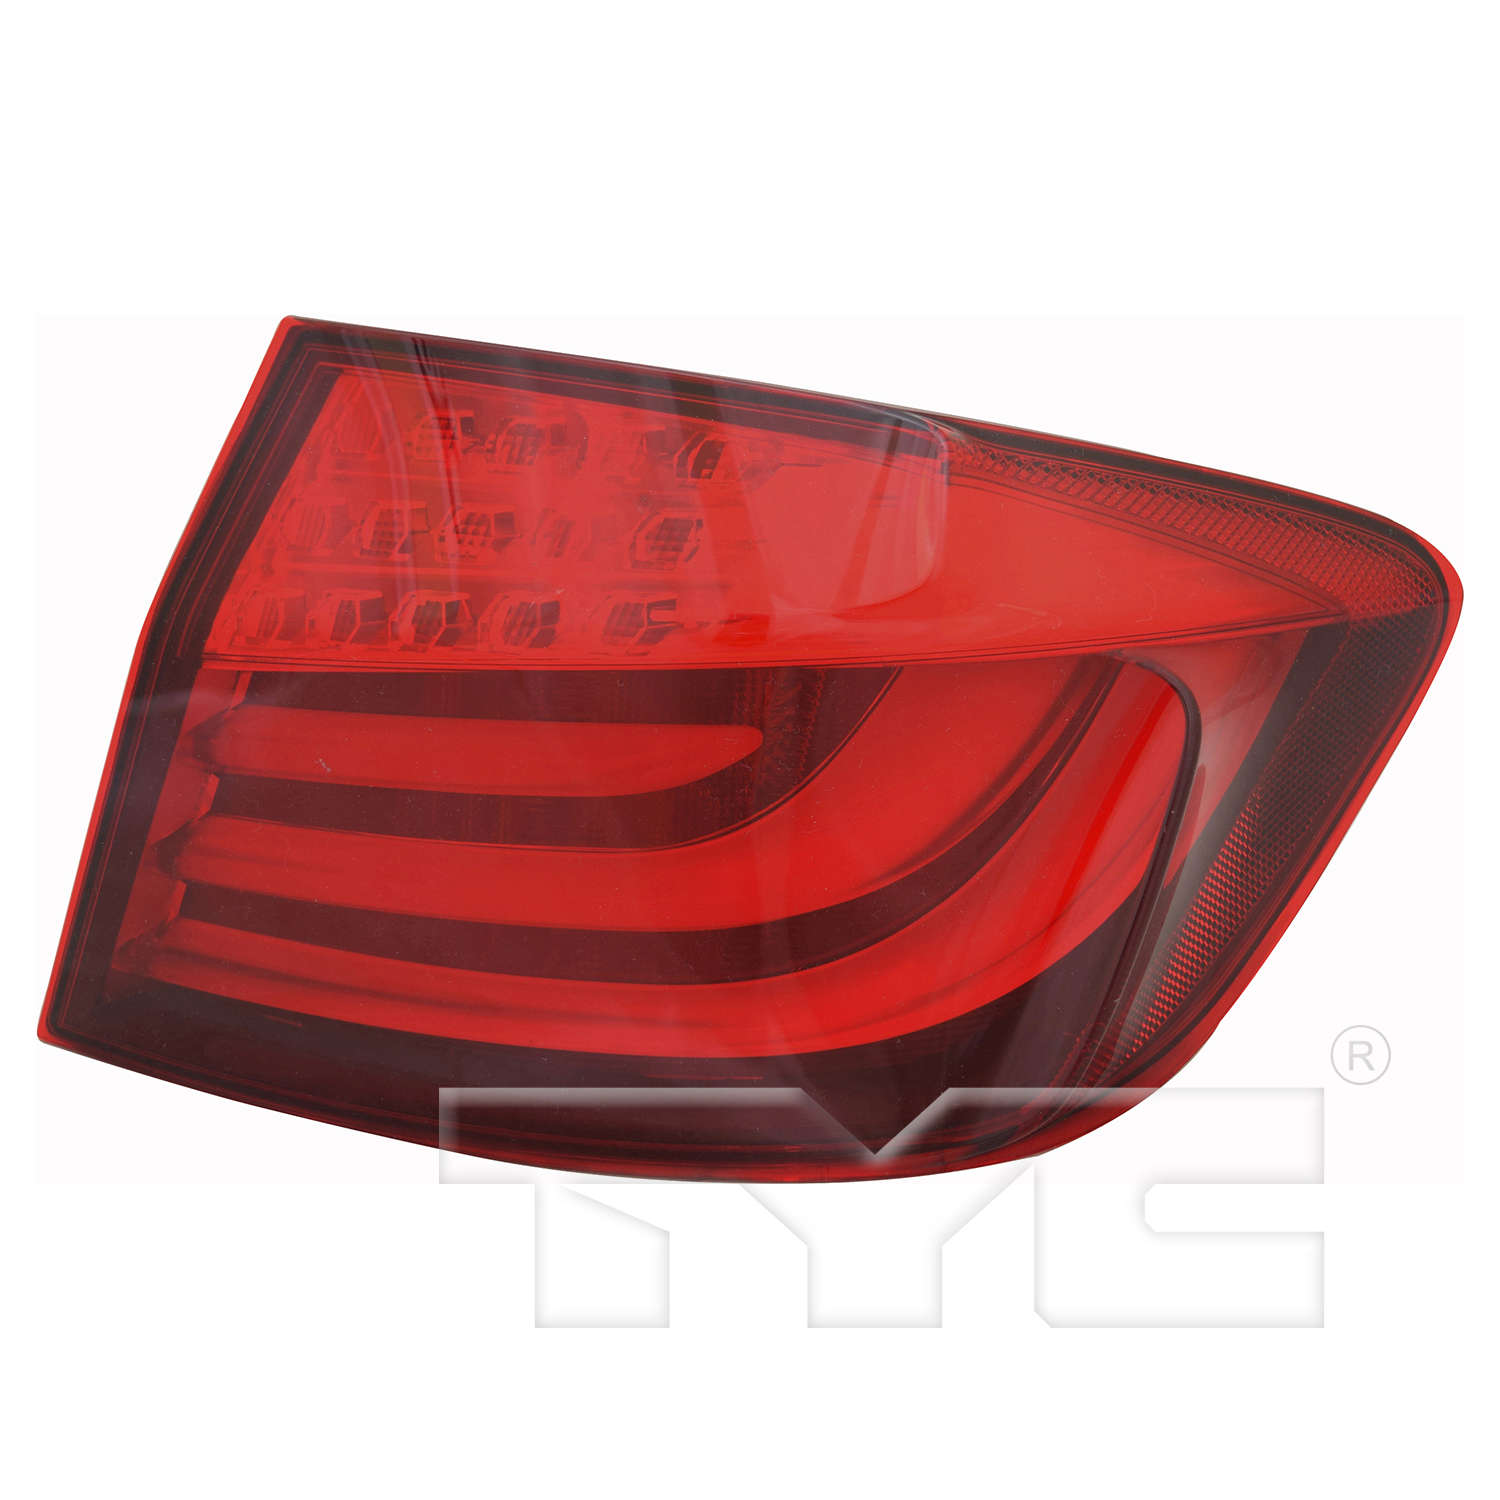 Aftermarket TAILLIGHTS for BMW - 550I, 550i,11-13,RT Taillamp assy outer